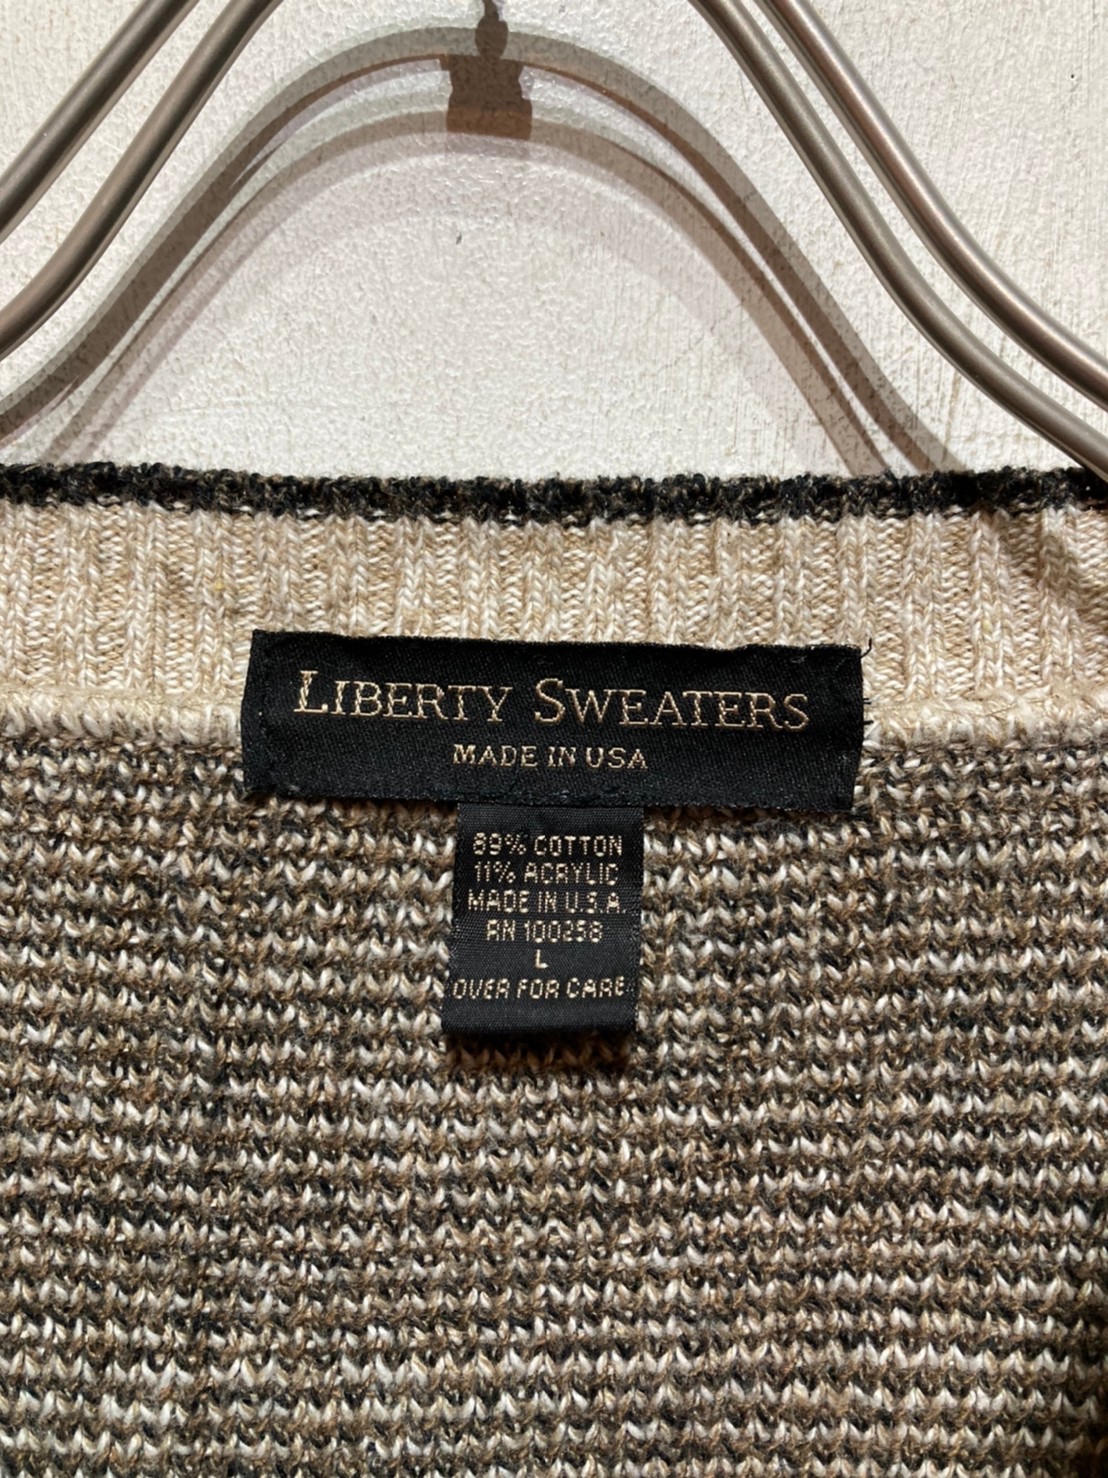 "LIBERTY SWEATERS” Knit「Made in USA」